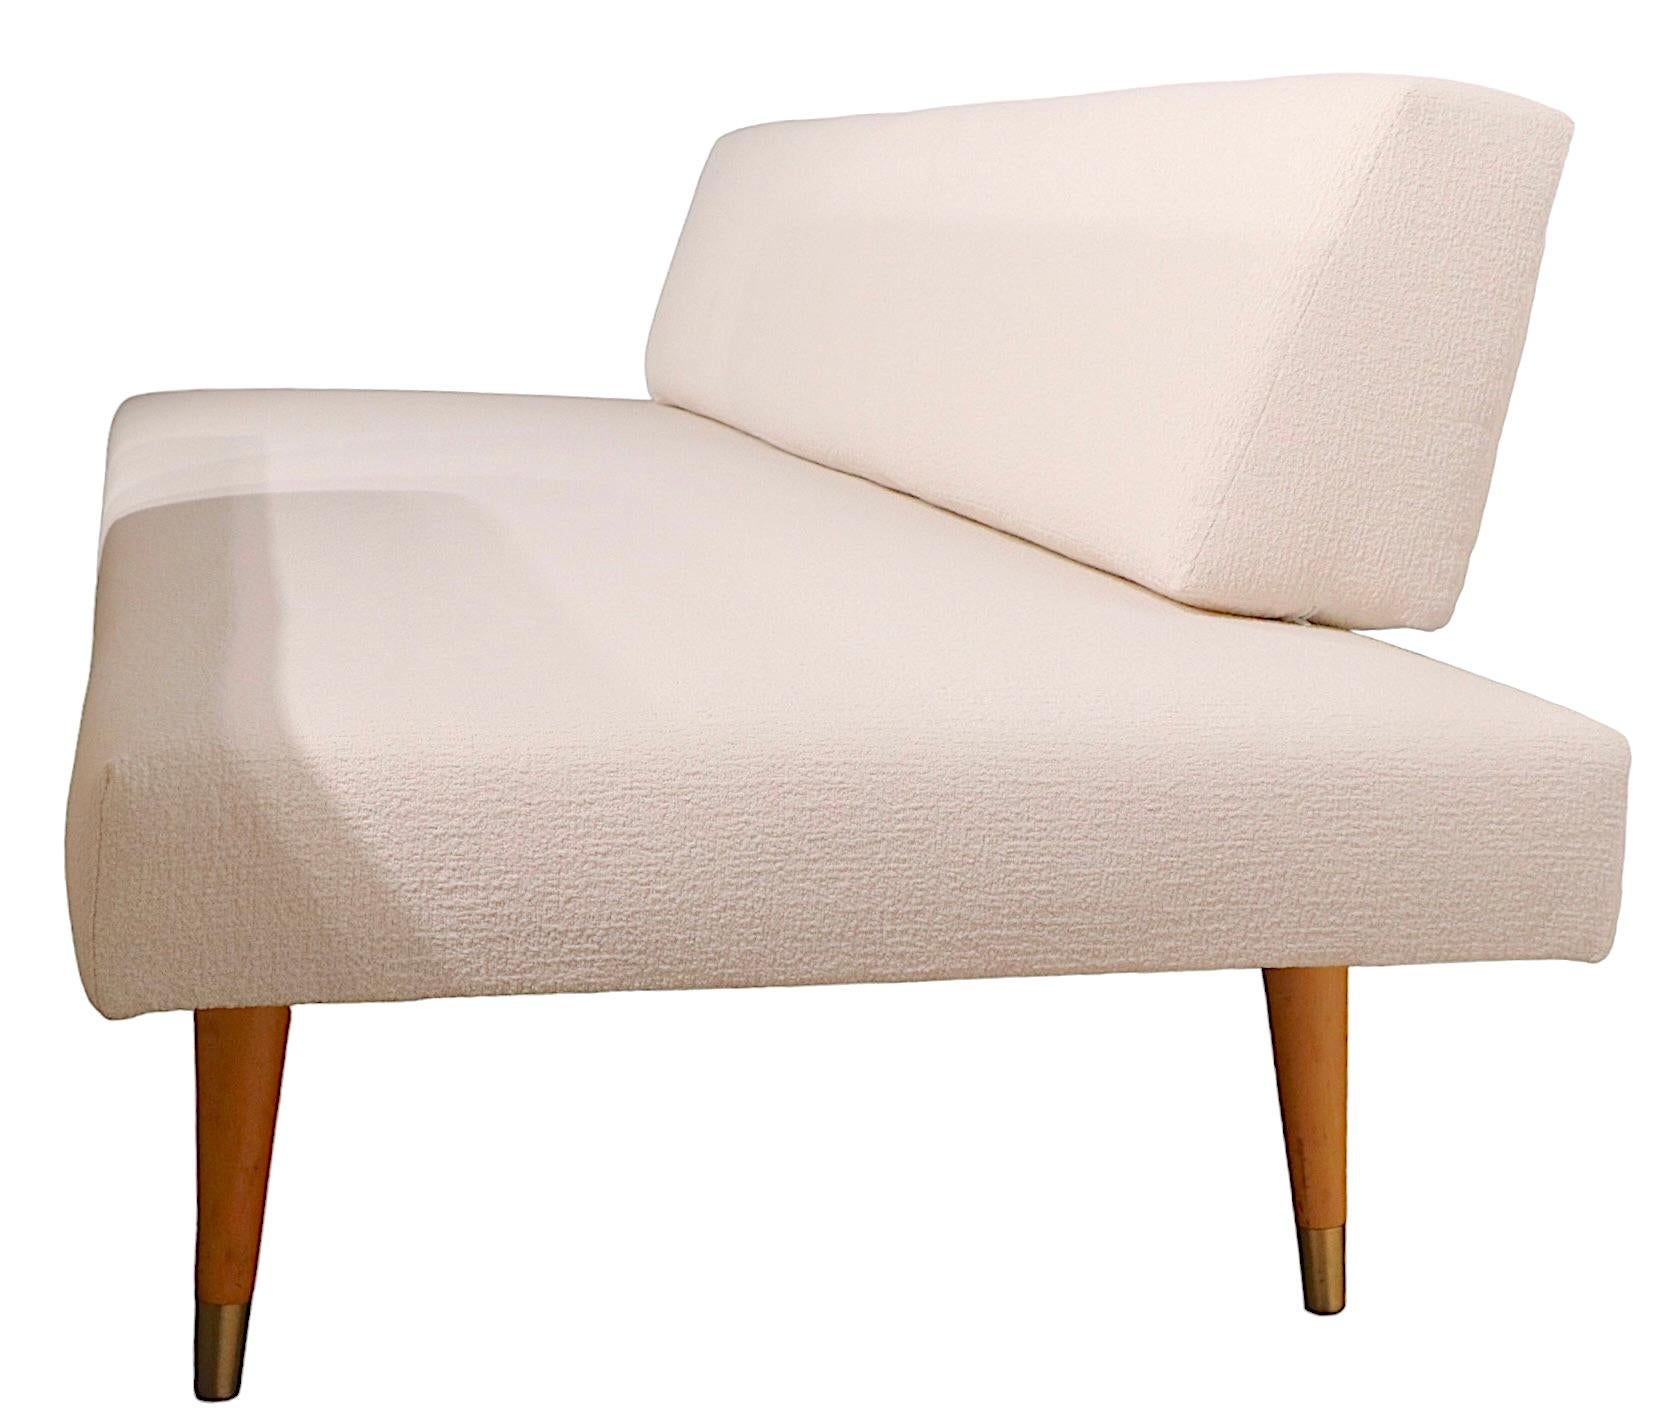 Classic pair of mid century daybed sofas, newly reupholstered in chic off white boucle fabric. The sofas feature asymmetrical backrest cushions, and upholstered seat cushions, on blonde tapered pole legs. Restored to like new condition, clean, ready